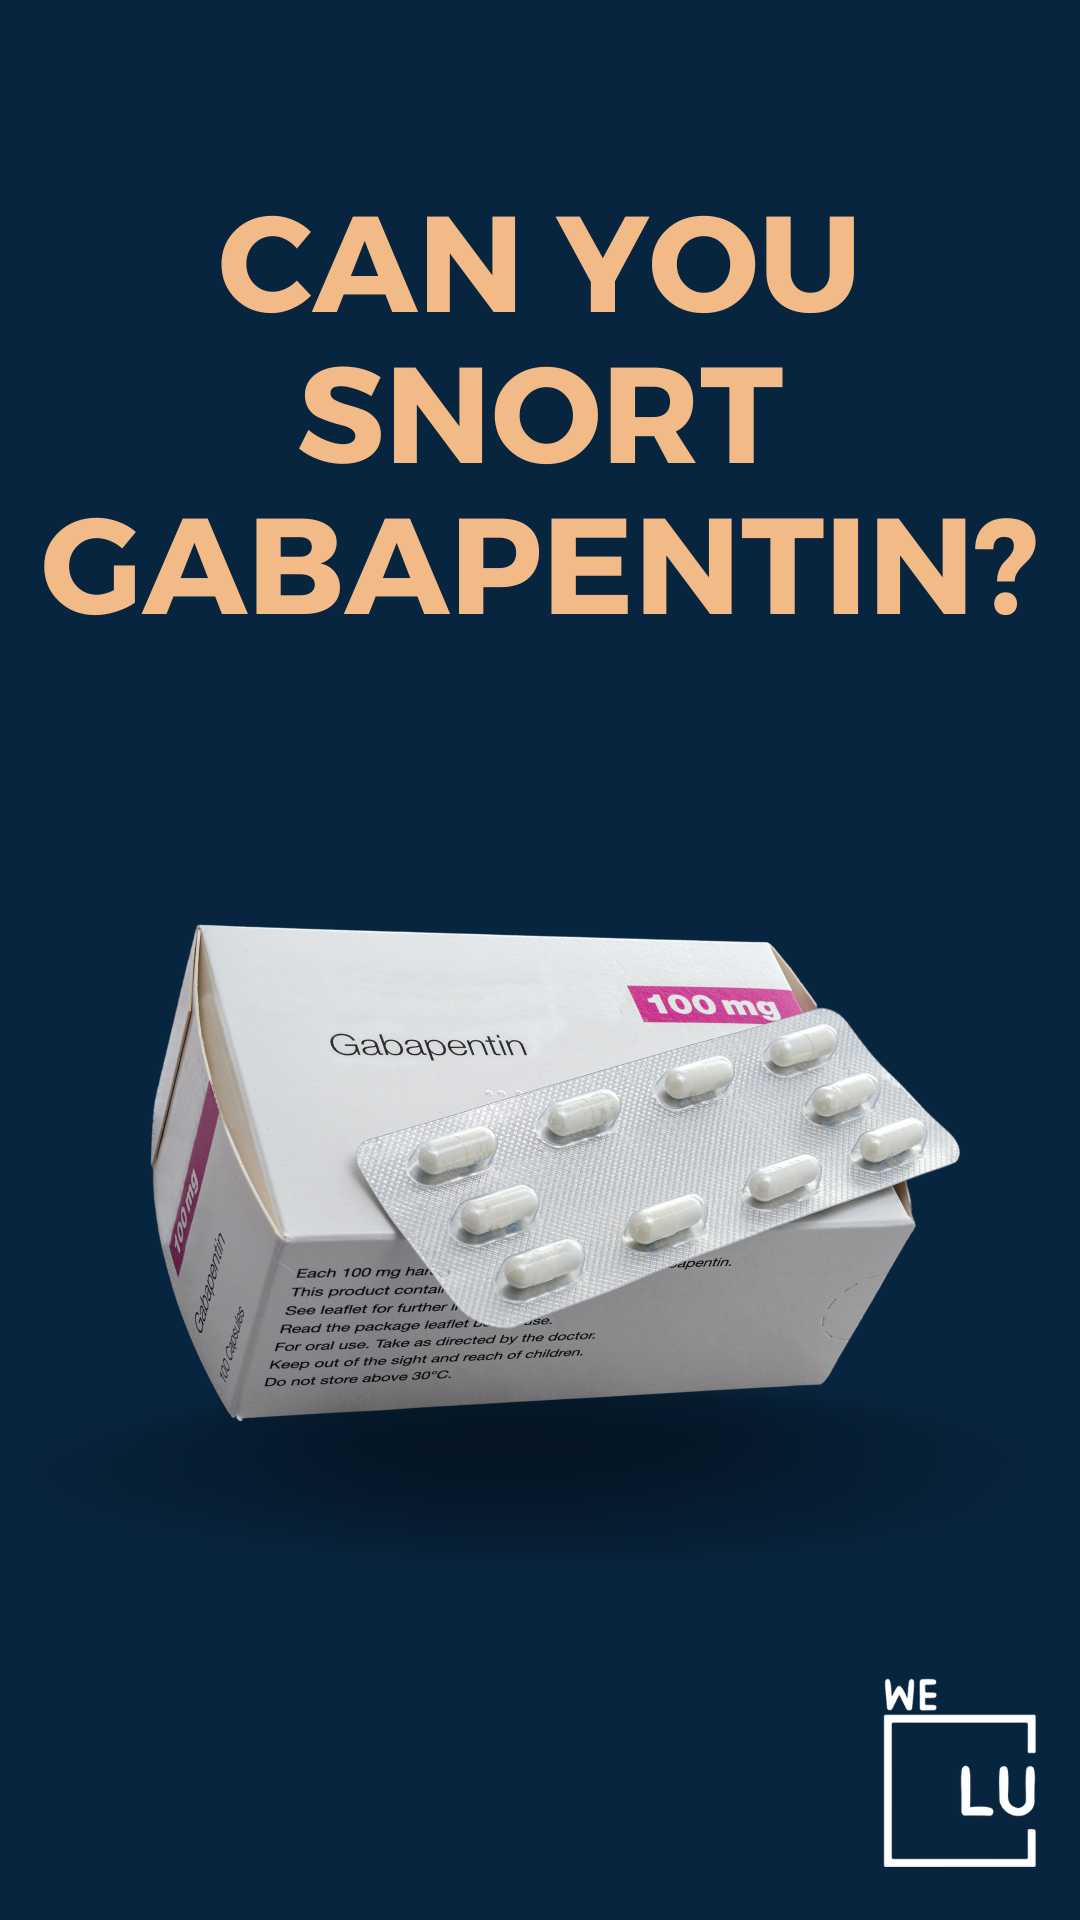 Is Gabapentin a Narcotic or a Controlled Substance? Gabapentin Narcotic Class. Gabapentin Narcotics.